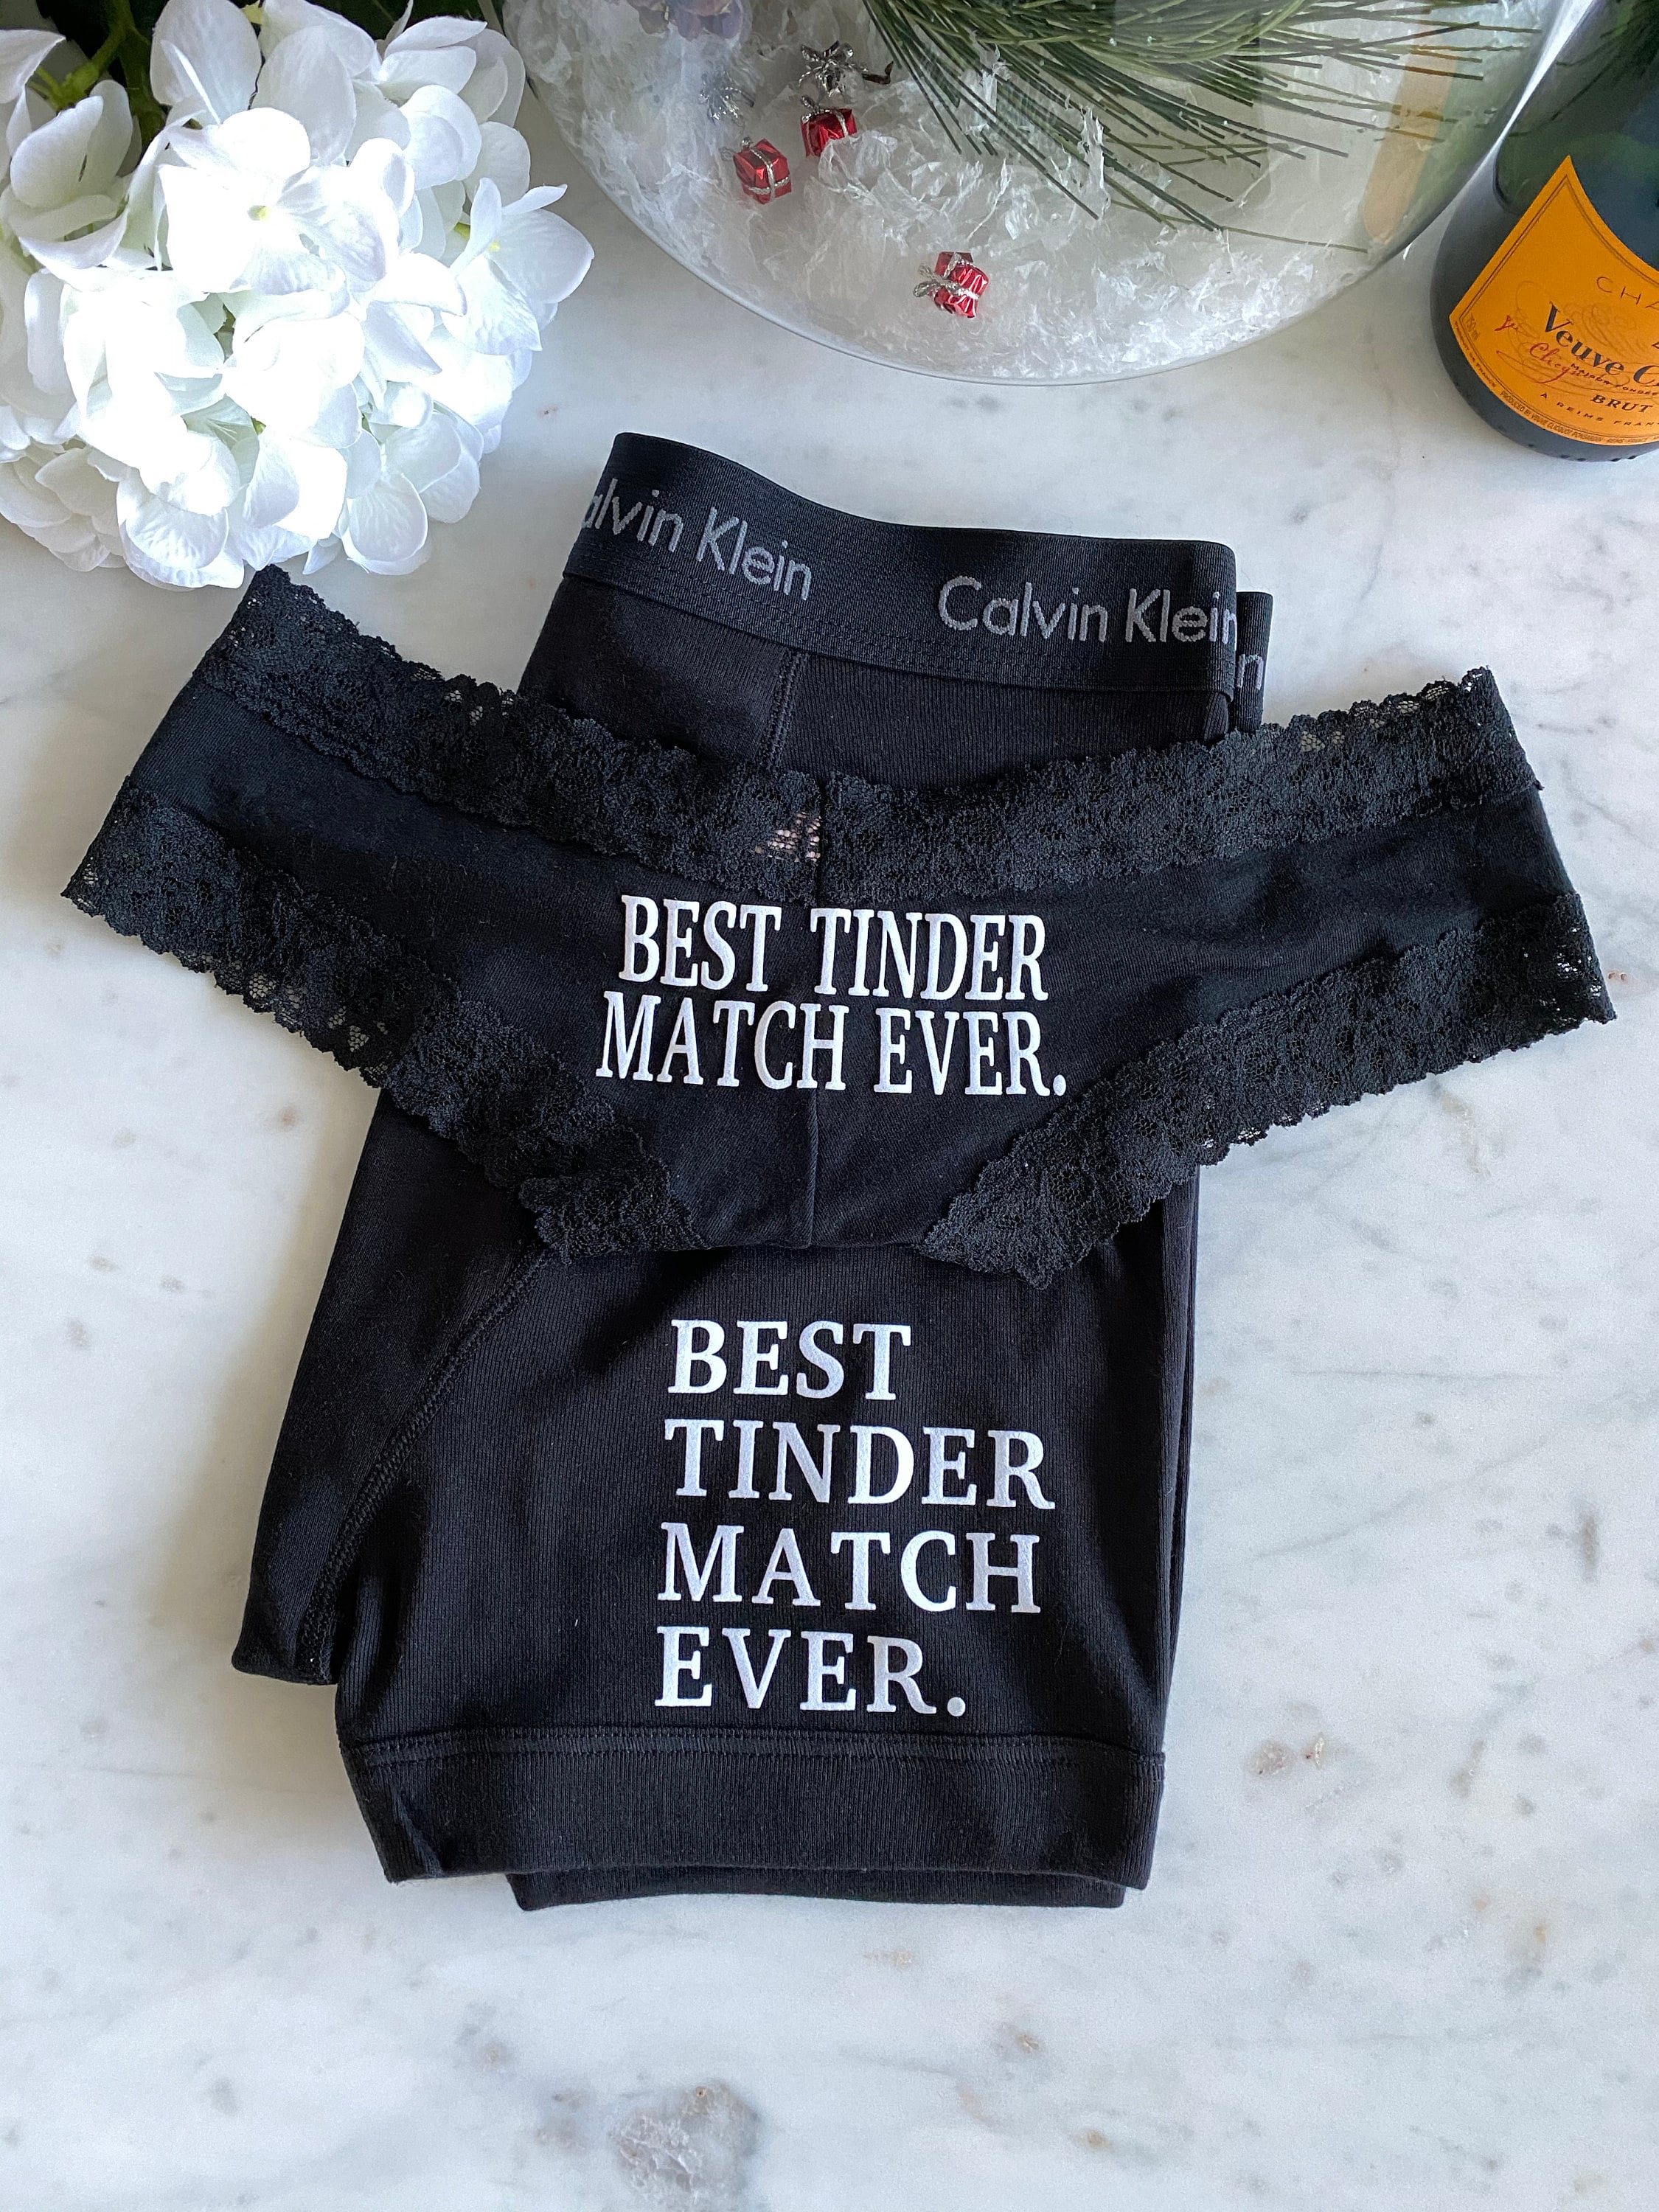 Calvin Klein and Victoria Secret Black Couples Best Tinder Match Ever, Personalized Boxer Briefs, Personalized Panties